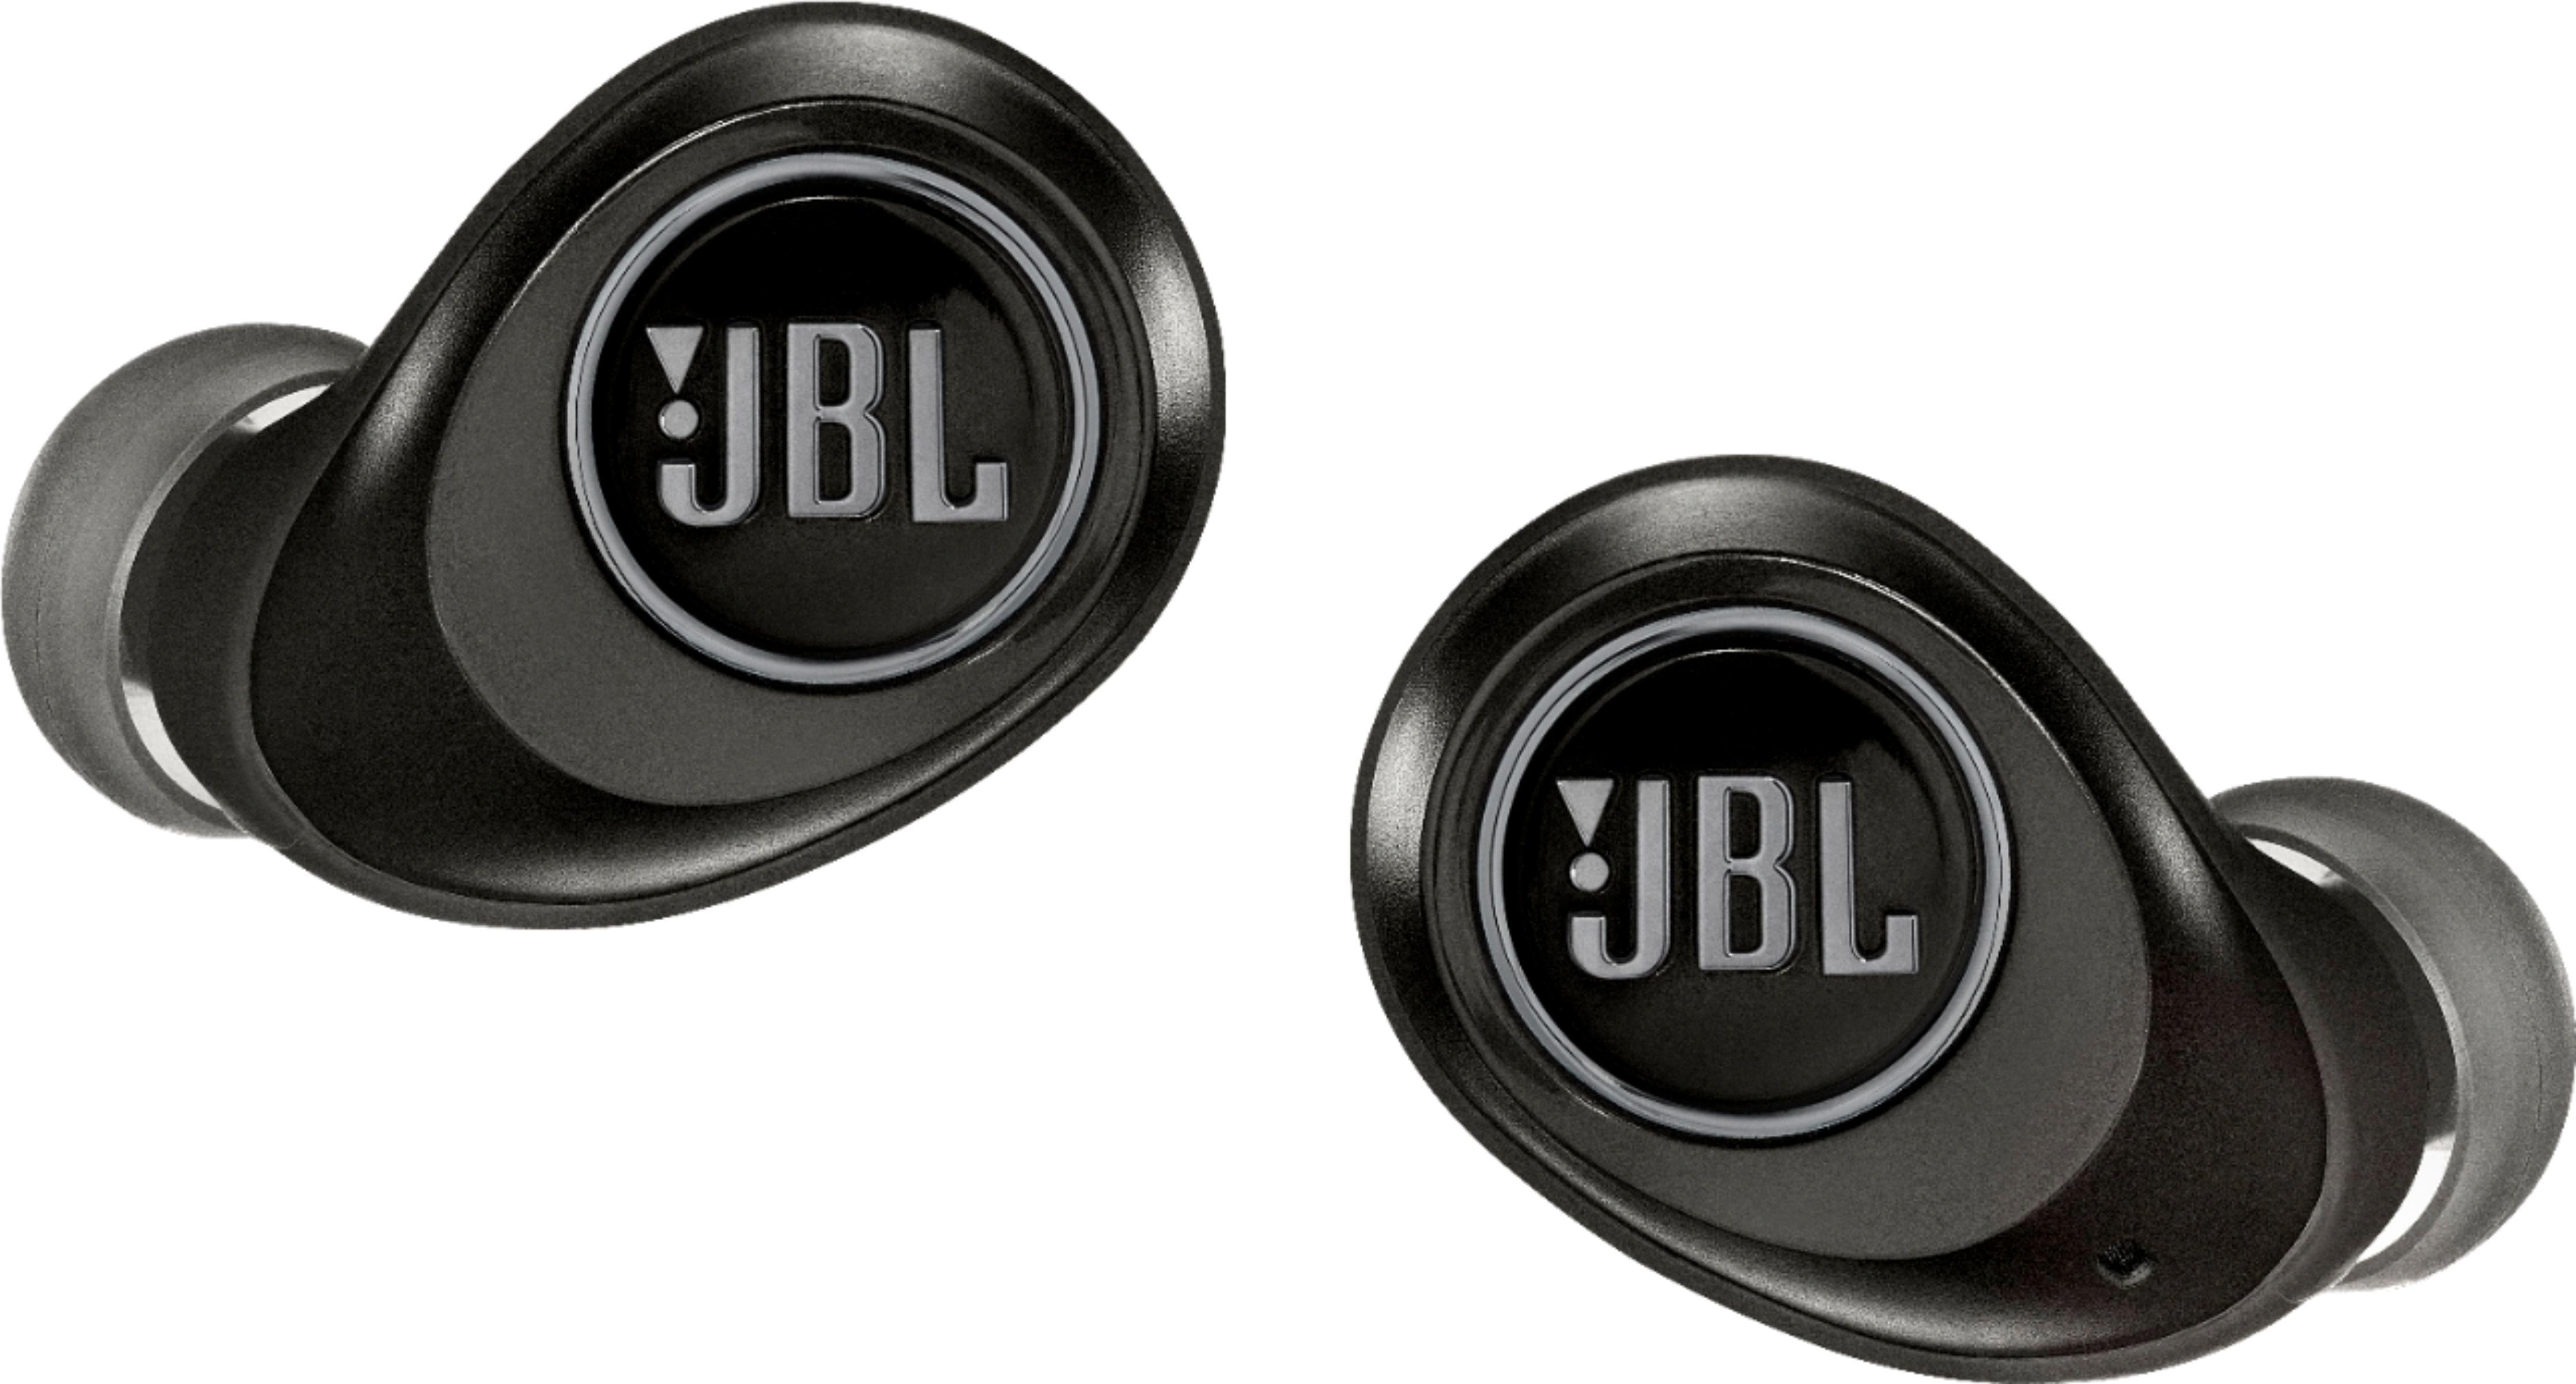 How To Connect Jbl Airpods To Iphone 23